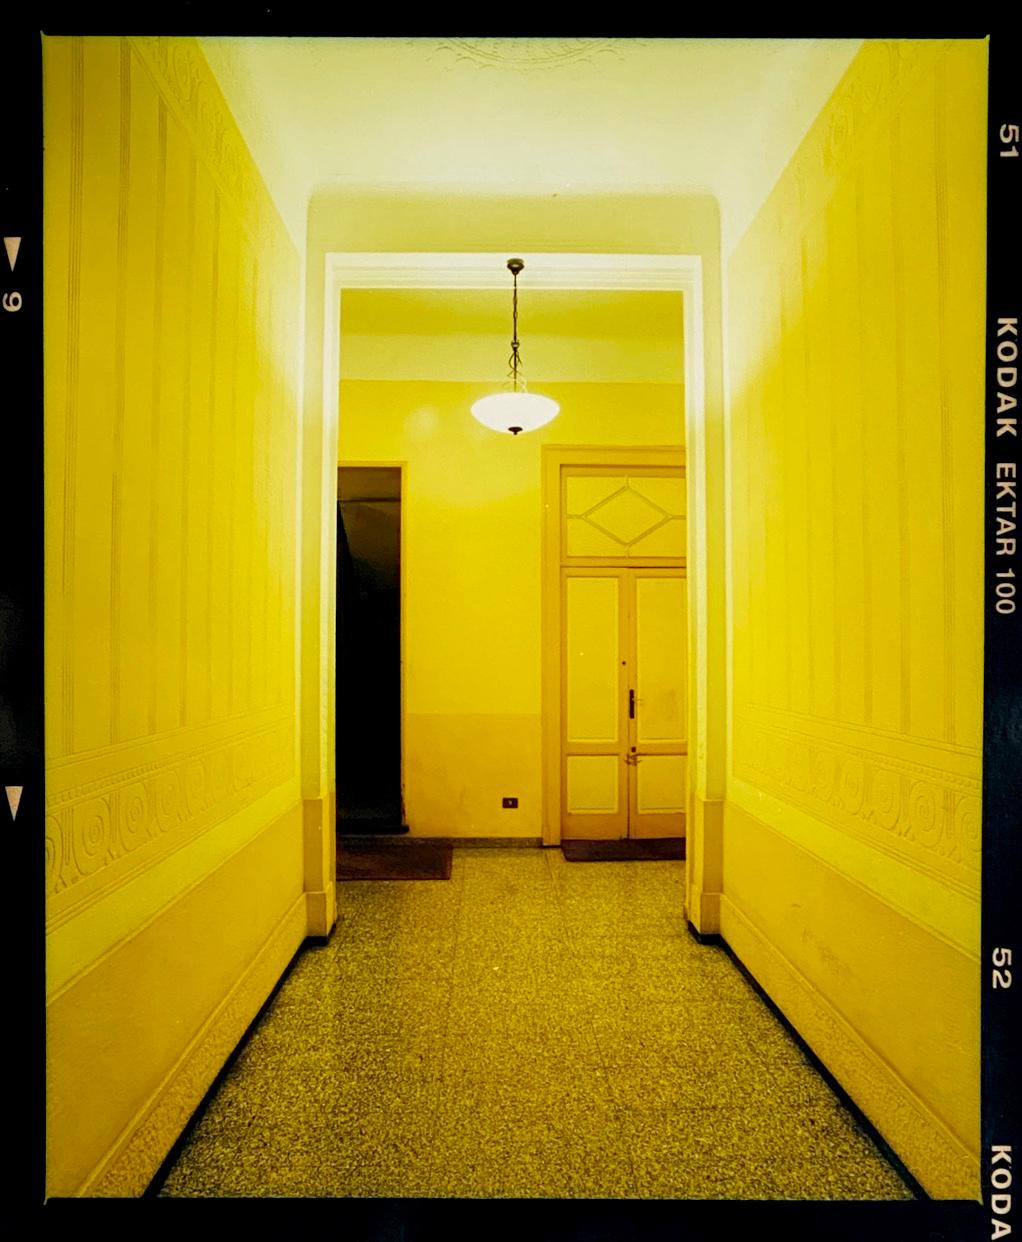 Yellow Corridor (Night), from Richard Heeps series A Short History of Milan which began as a special project for the 2018 Affordable Art Fair Milan. It was well received and the artwork has become popular with art buyers around the world. Richard